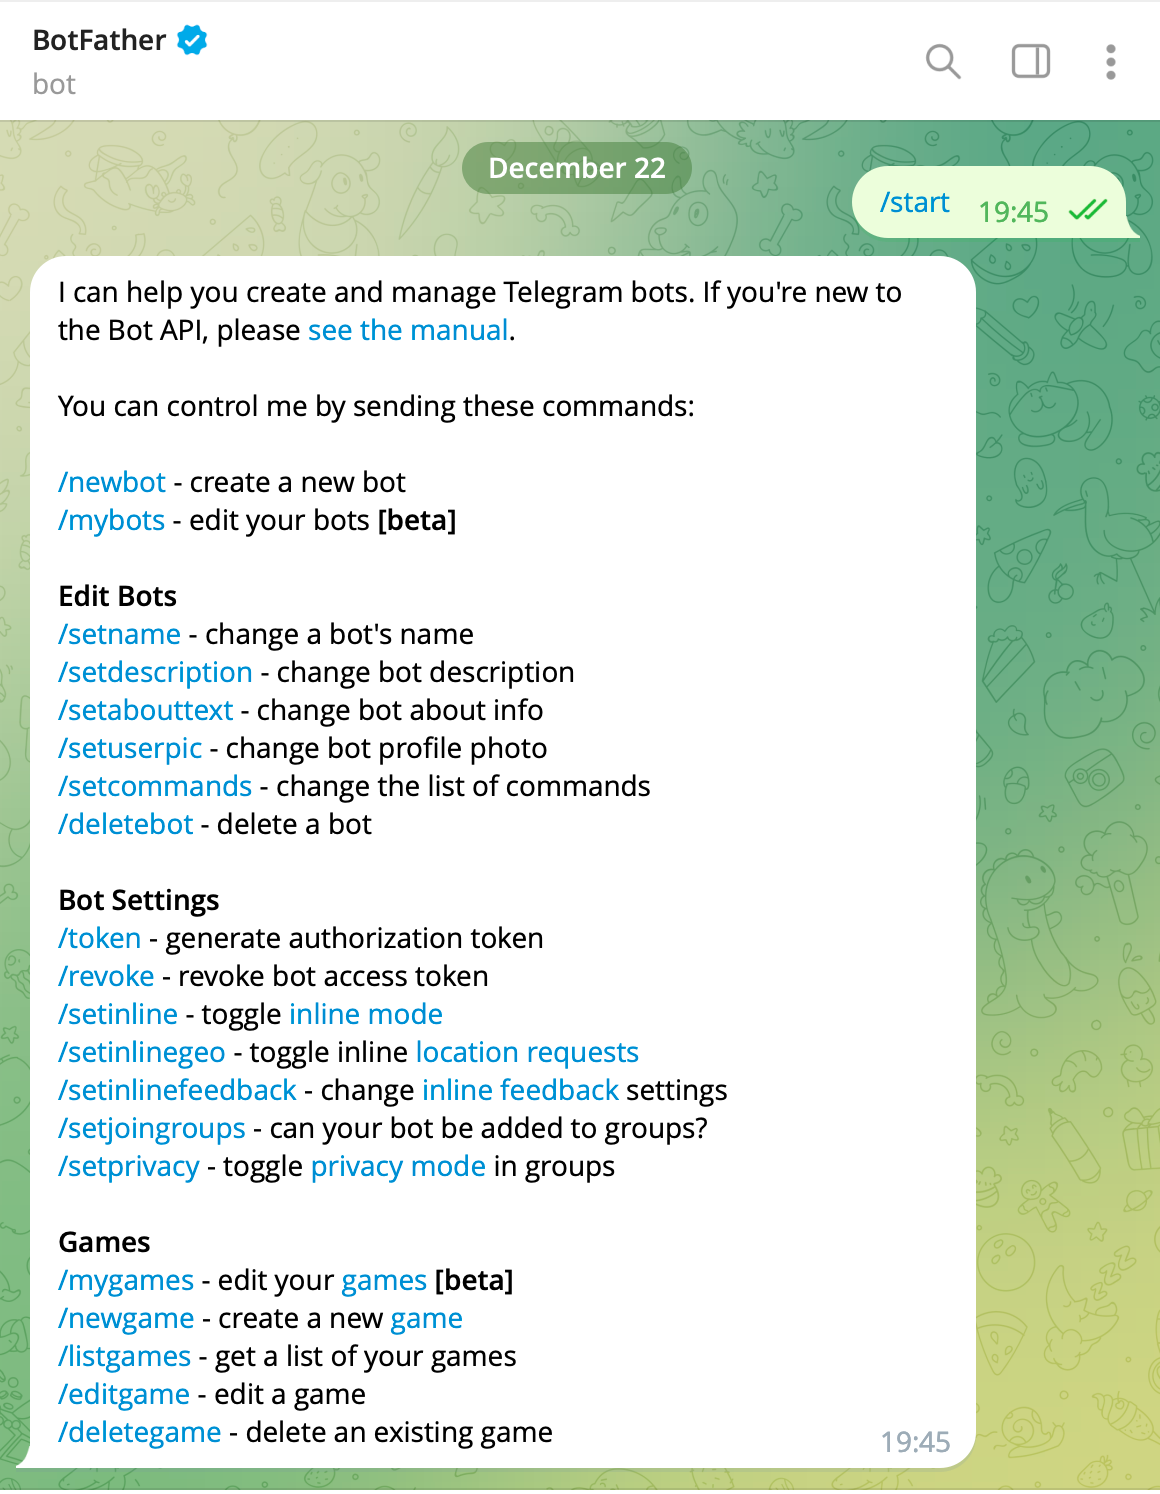 How to Generate a Token for Telegram Bot API | Geek Culture